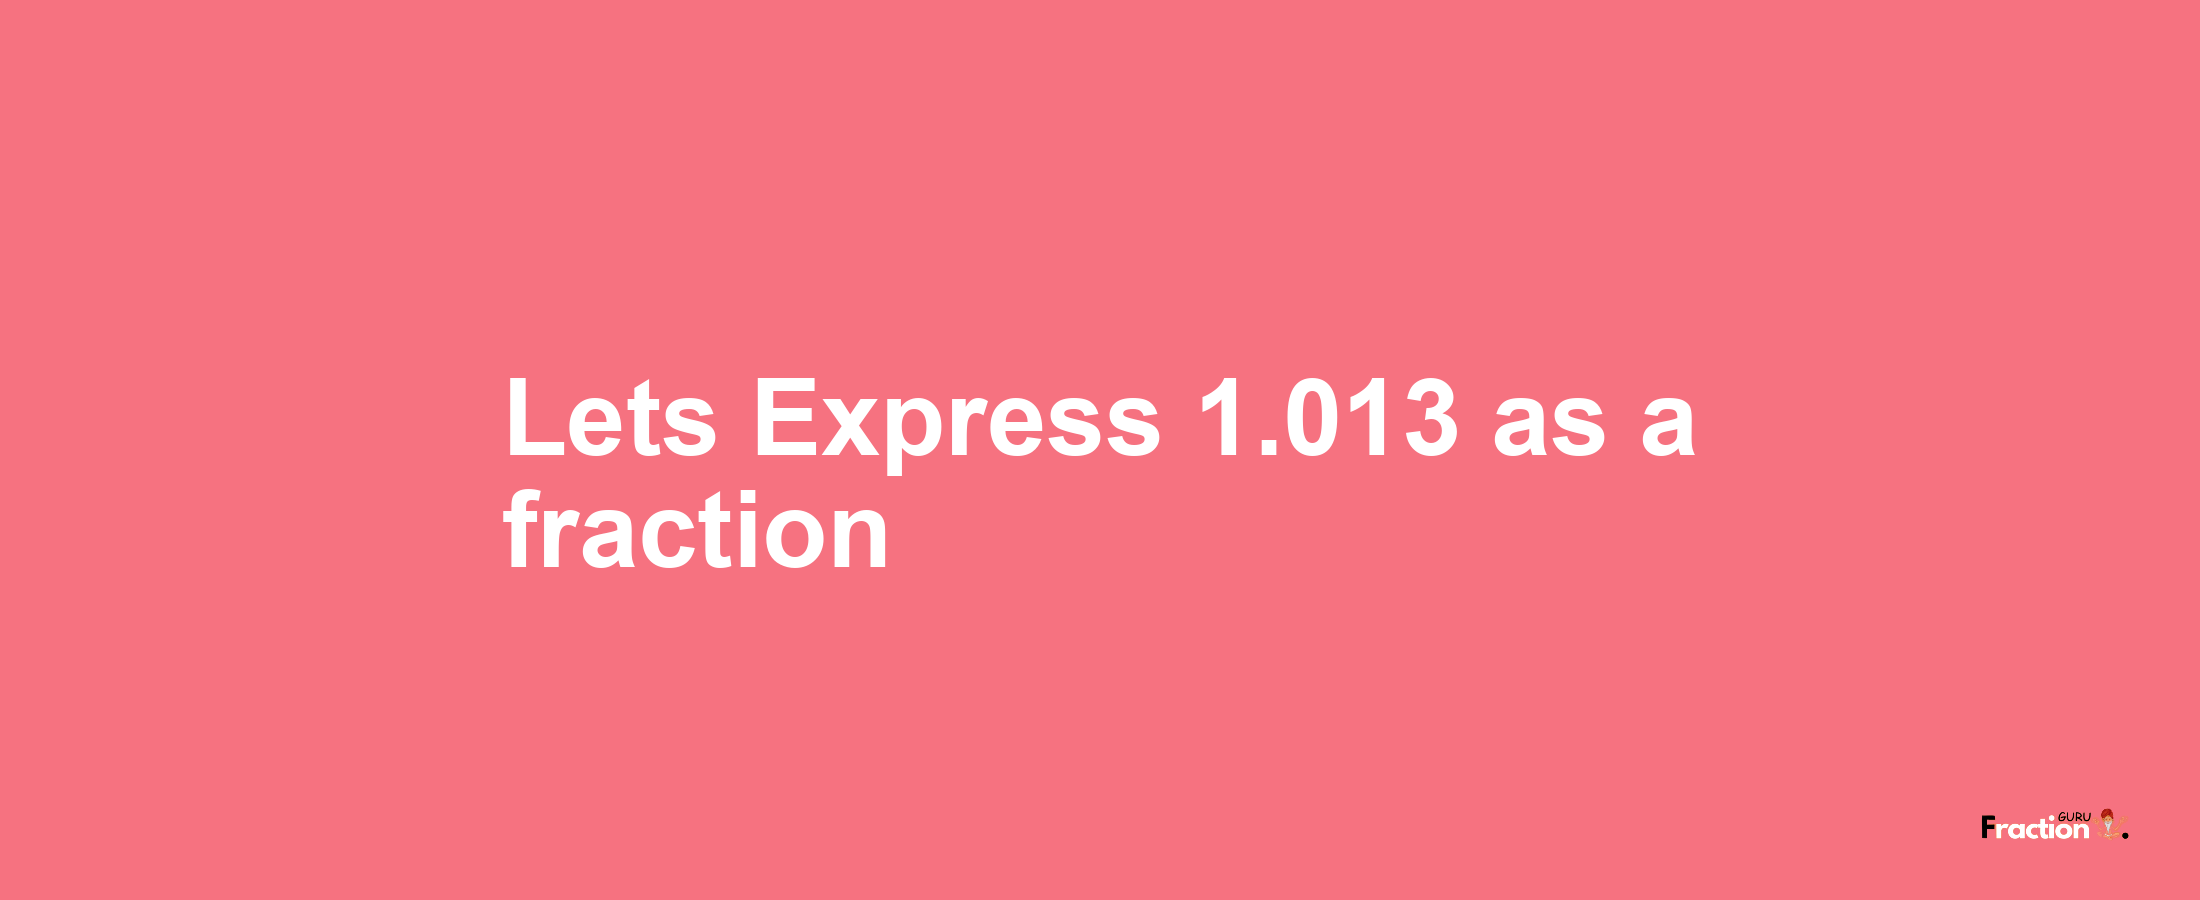 Lets Express 1.013 as afraction